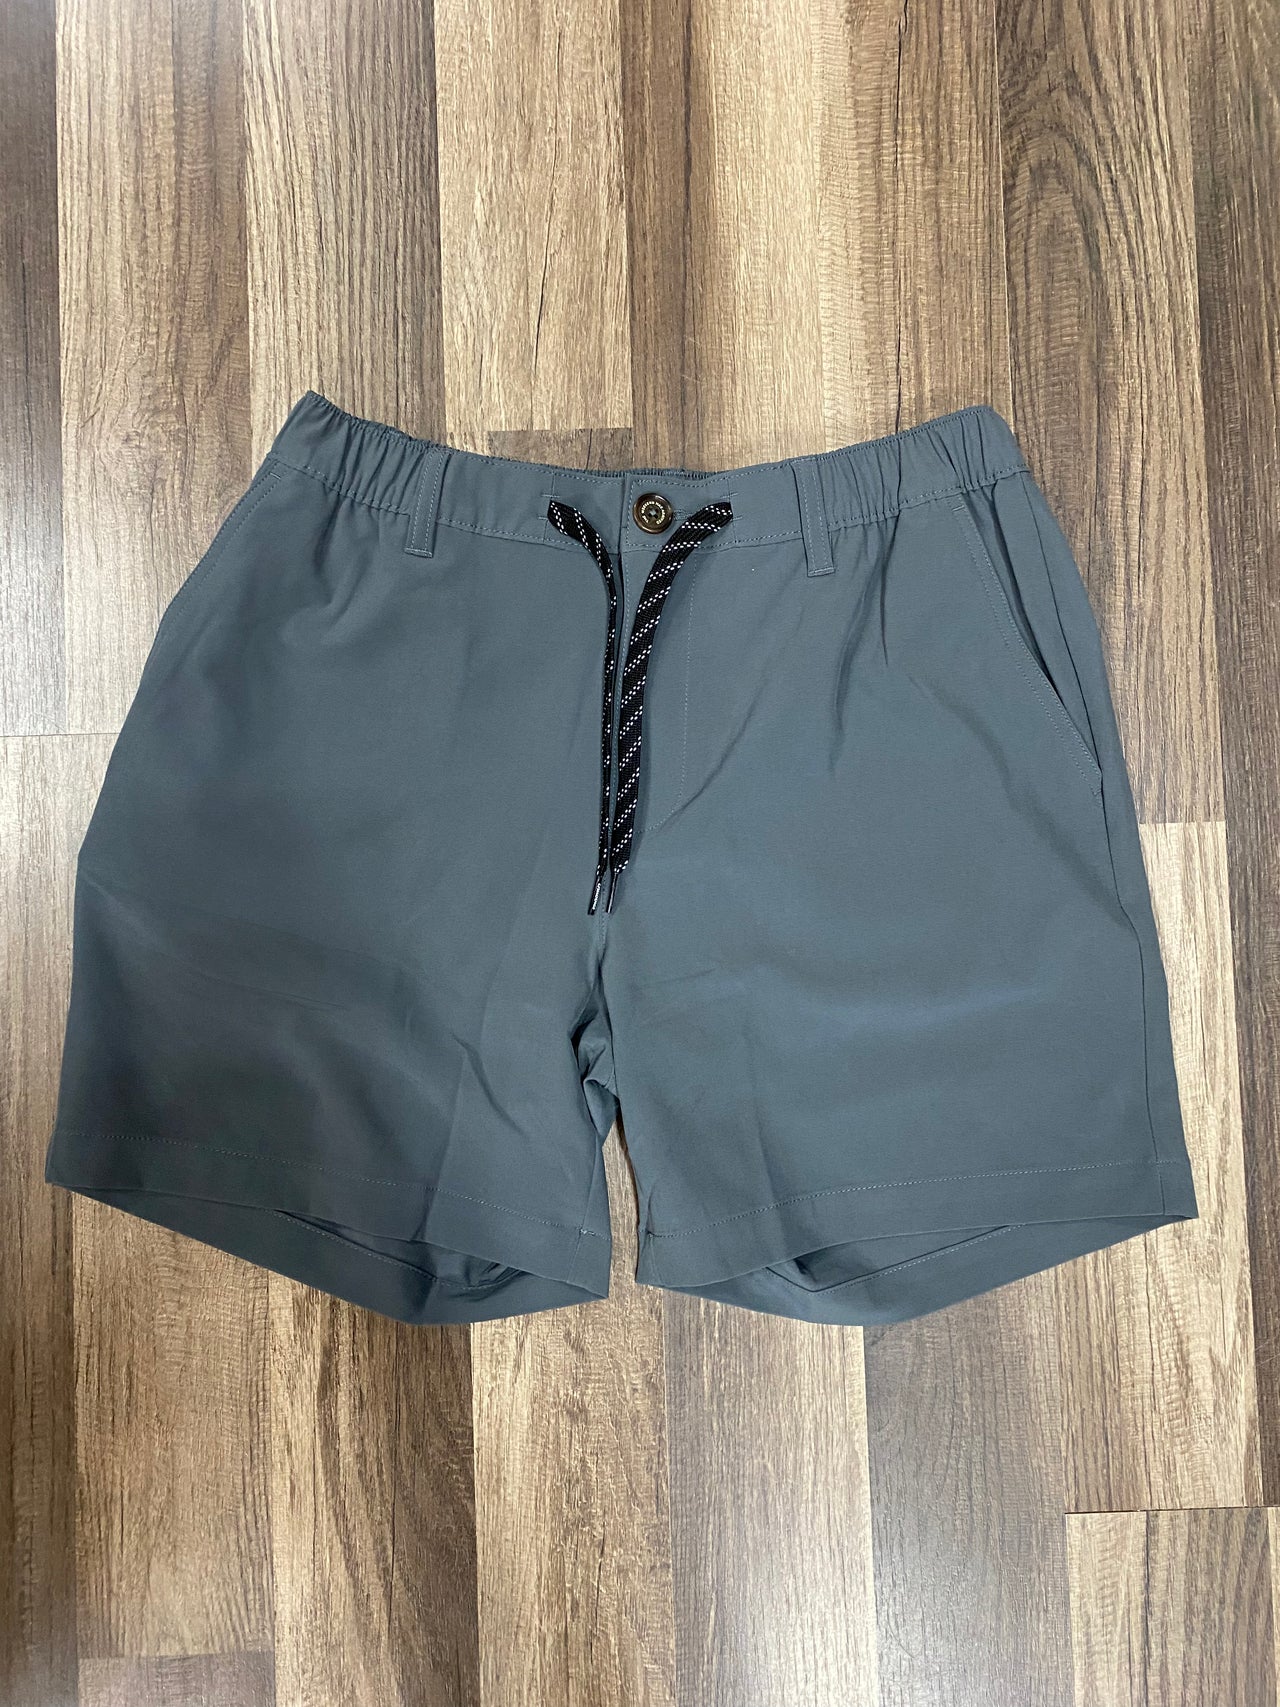 The Musts 6.0" Everywear Performance Short